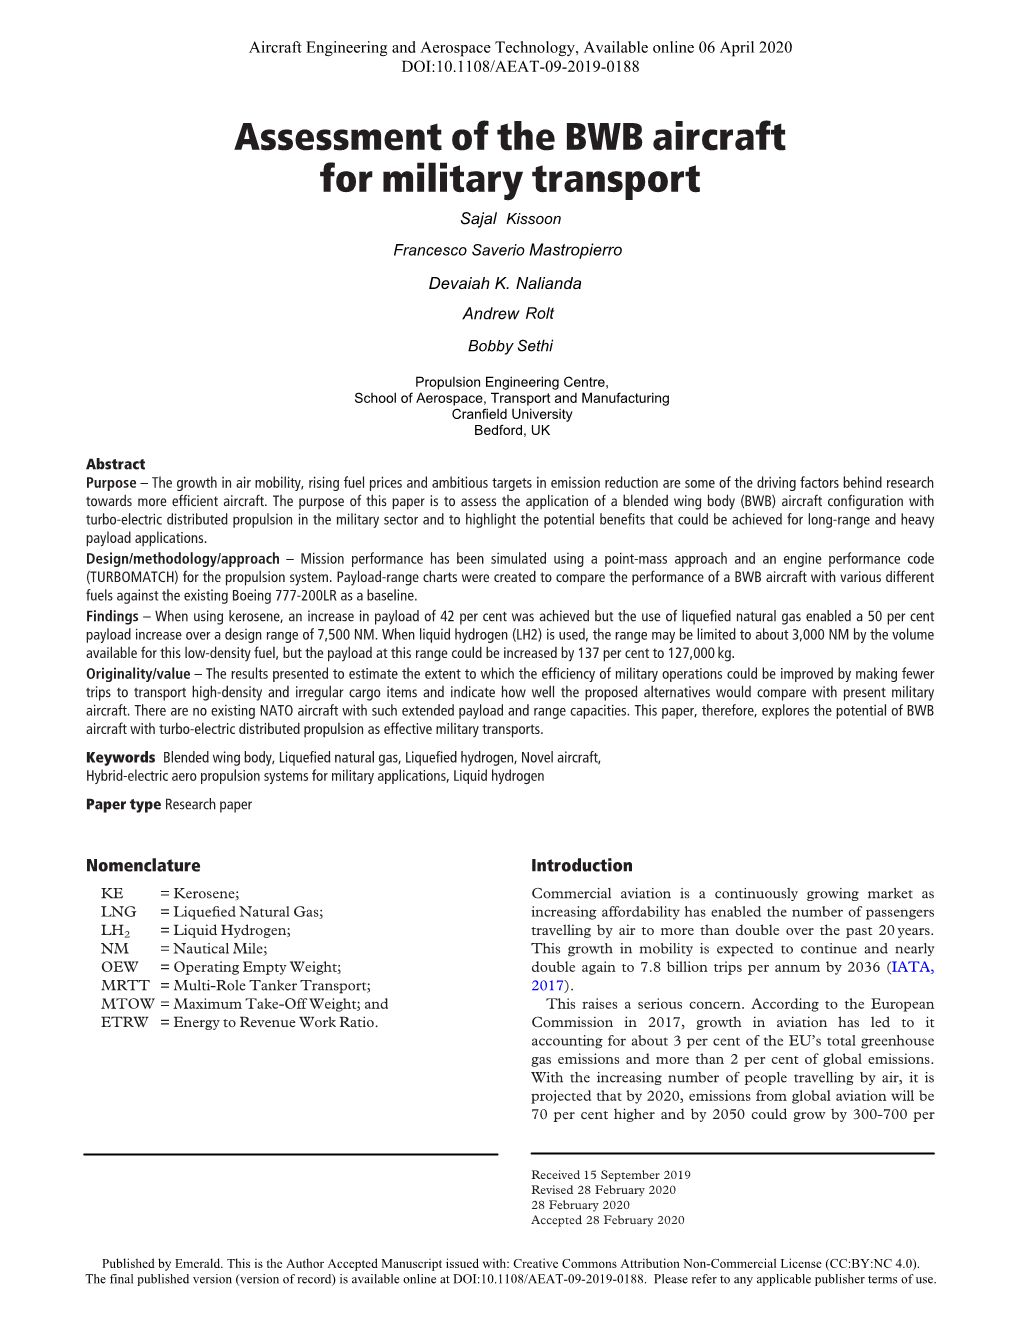 Assessment of the BWB Aircraft for Military Transport